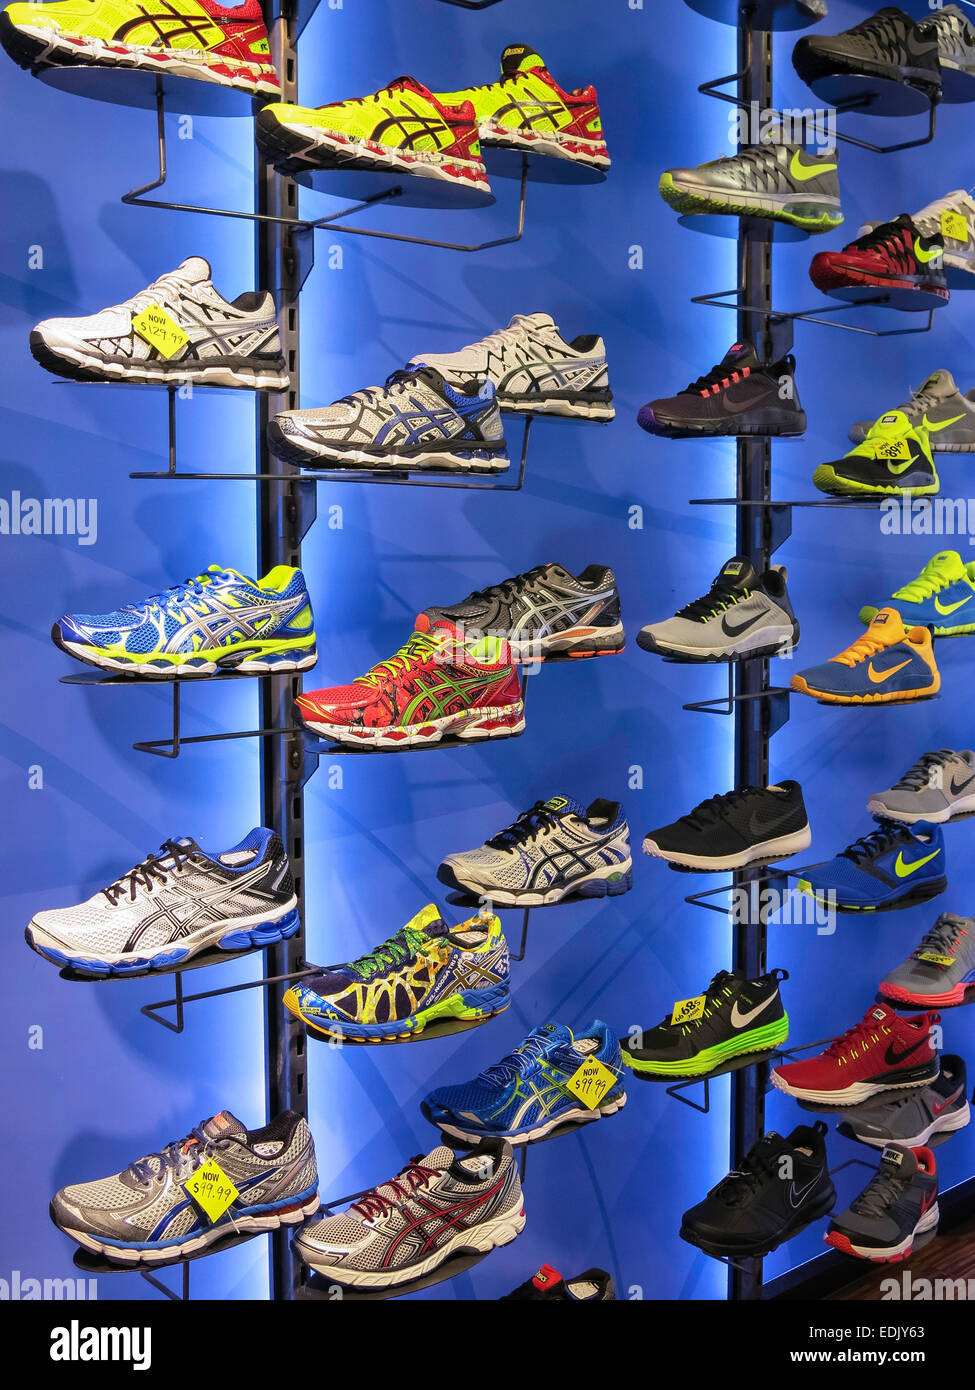 Athletic Footwear Wall, Modell's Sporting Goods Store Interior, NYC ...